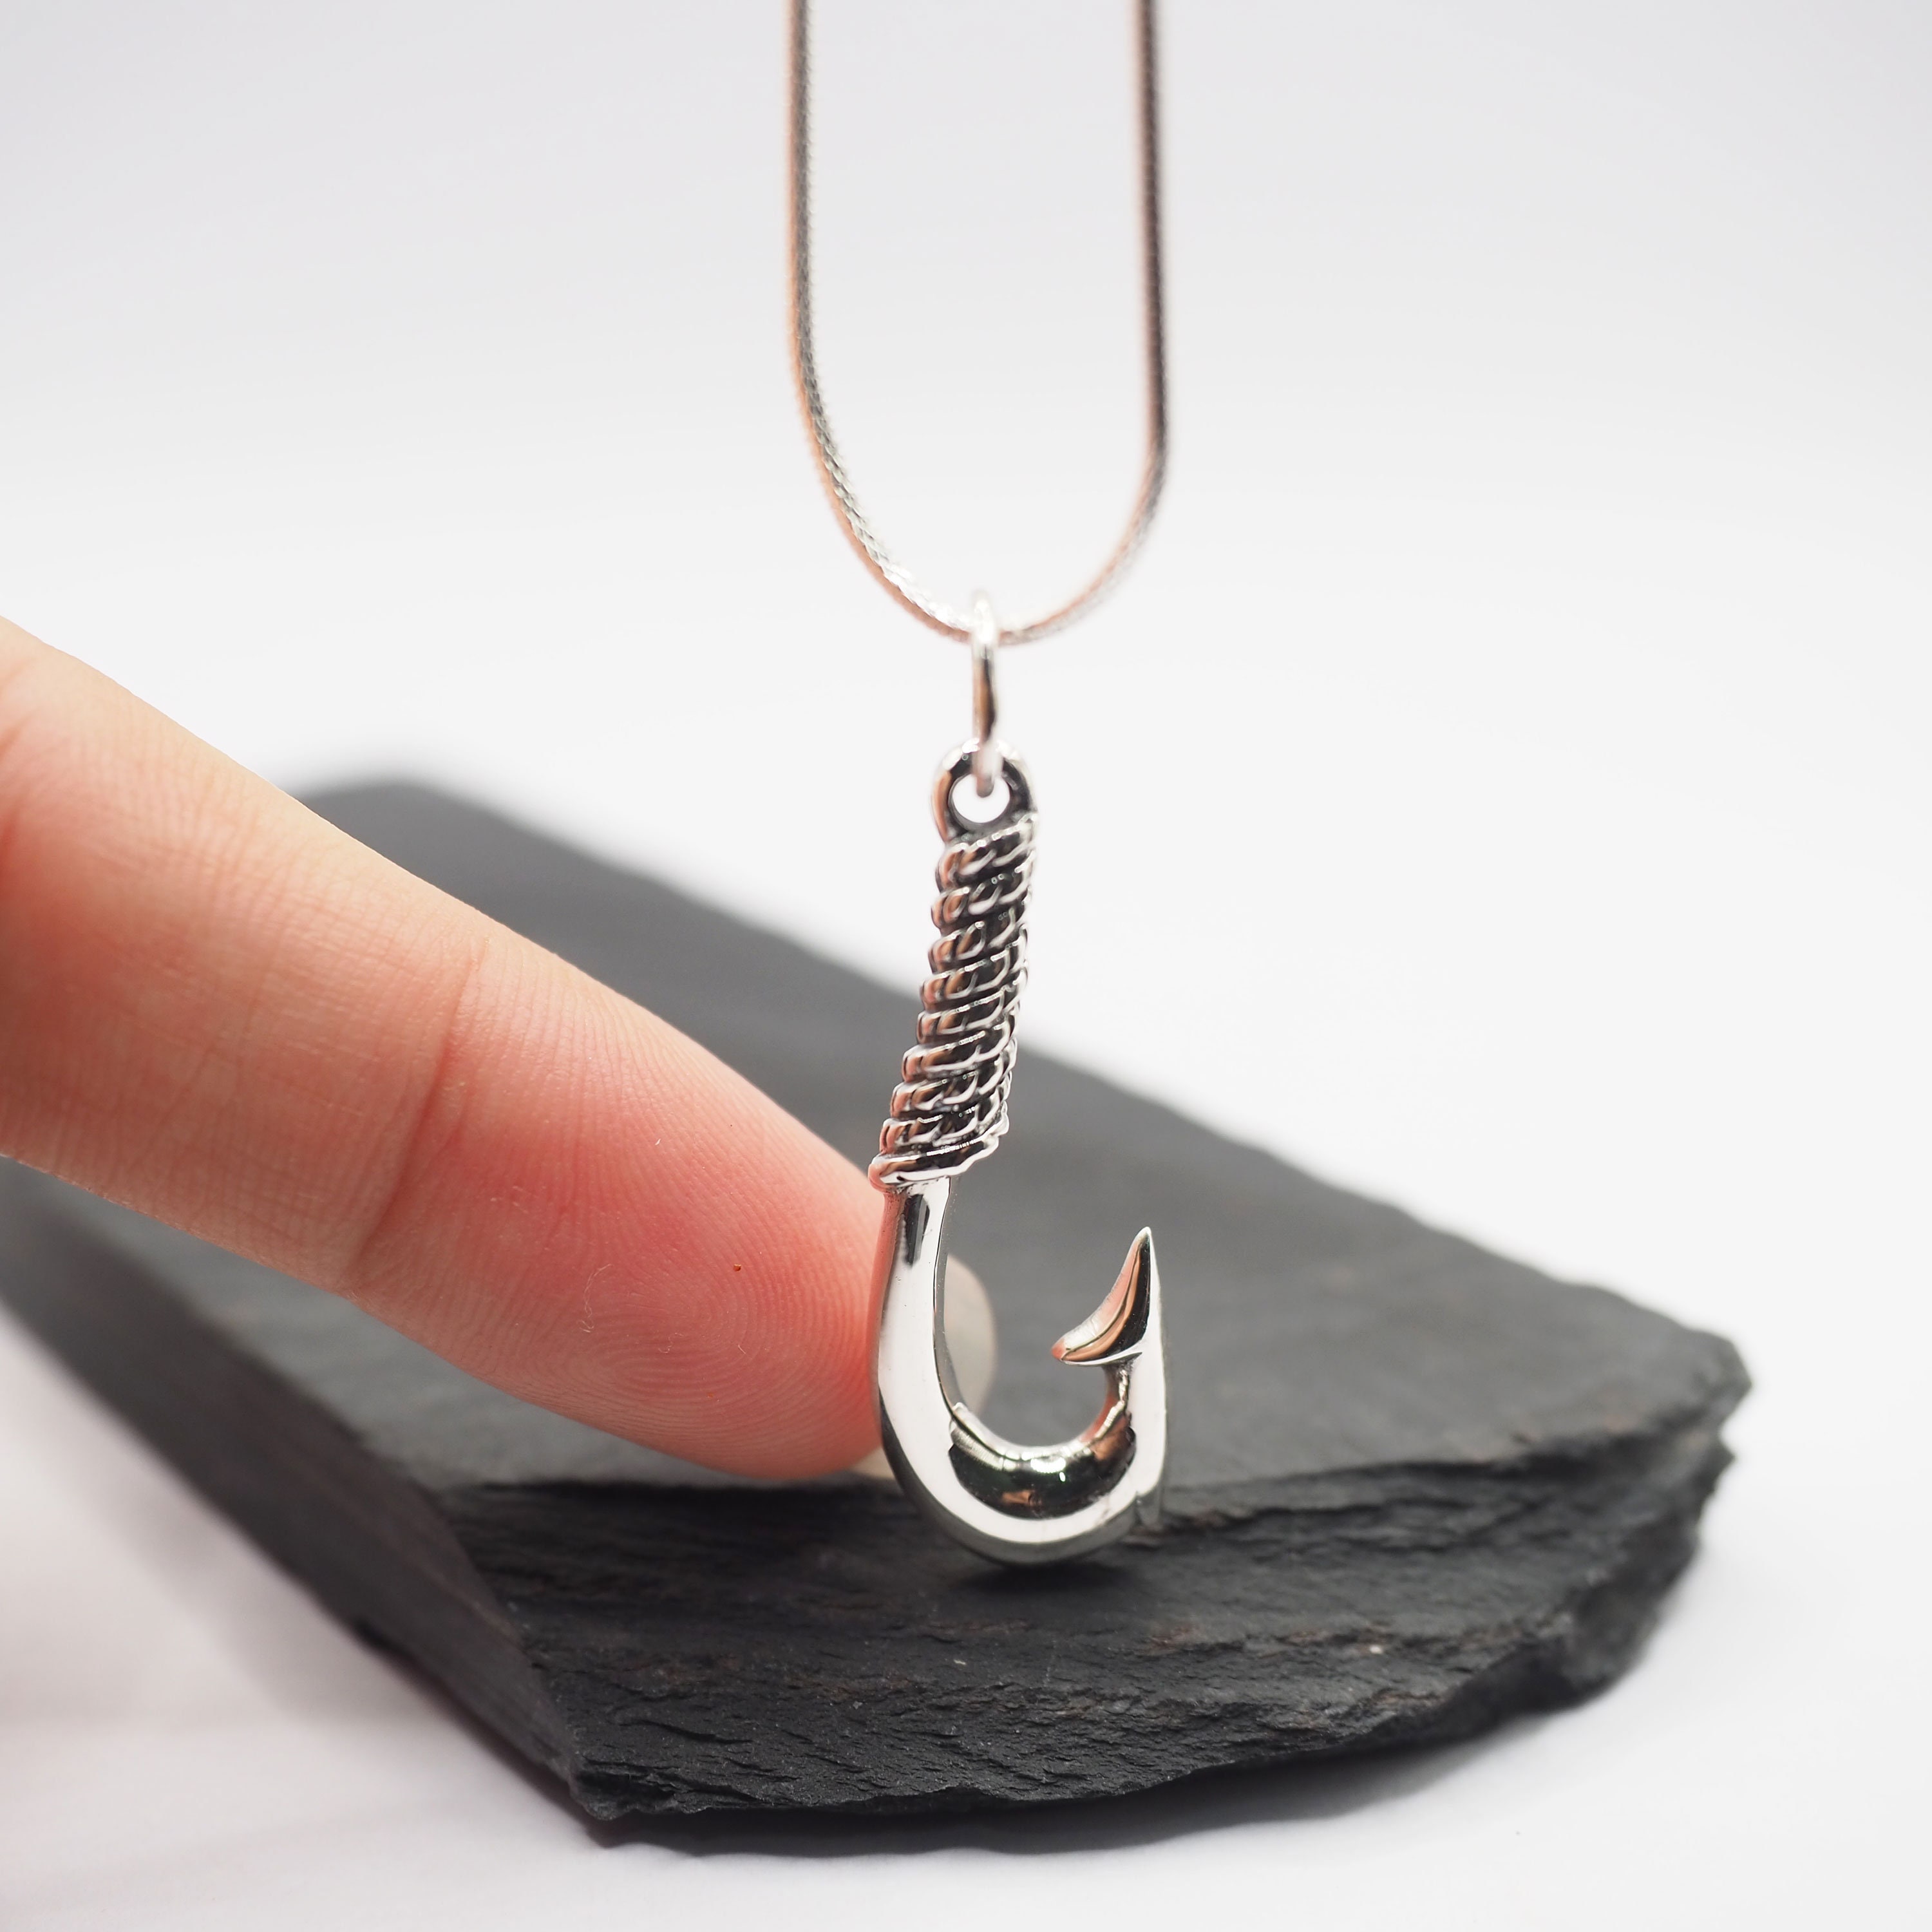 Sterling Silver Fish Hook Pendant Necklace, Fish Hook Charm, Sea